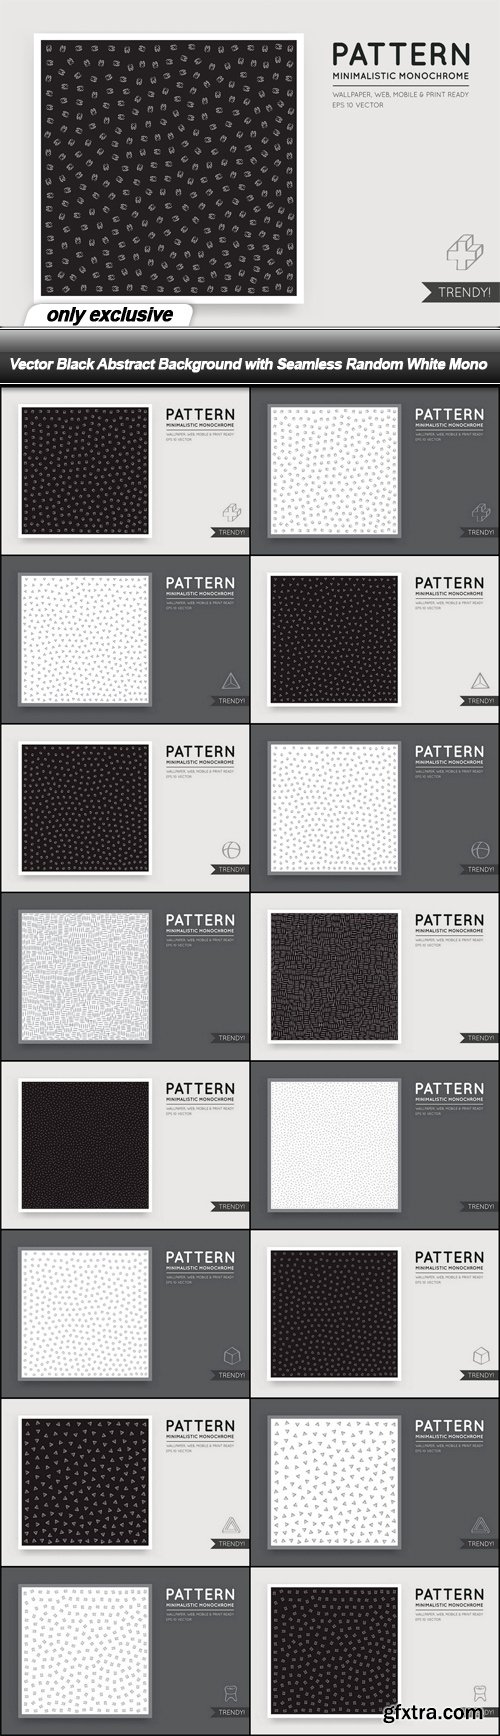 Vector Black Abstract Background with Seamless Random White Mono - 16 EPS